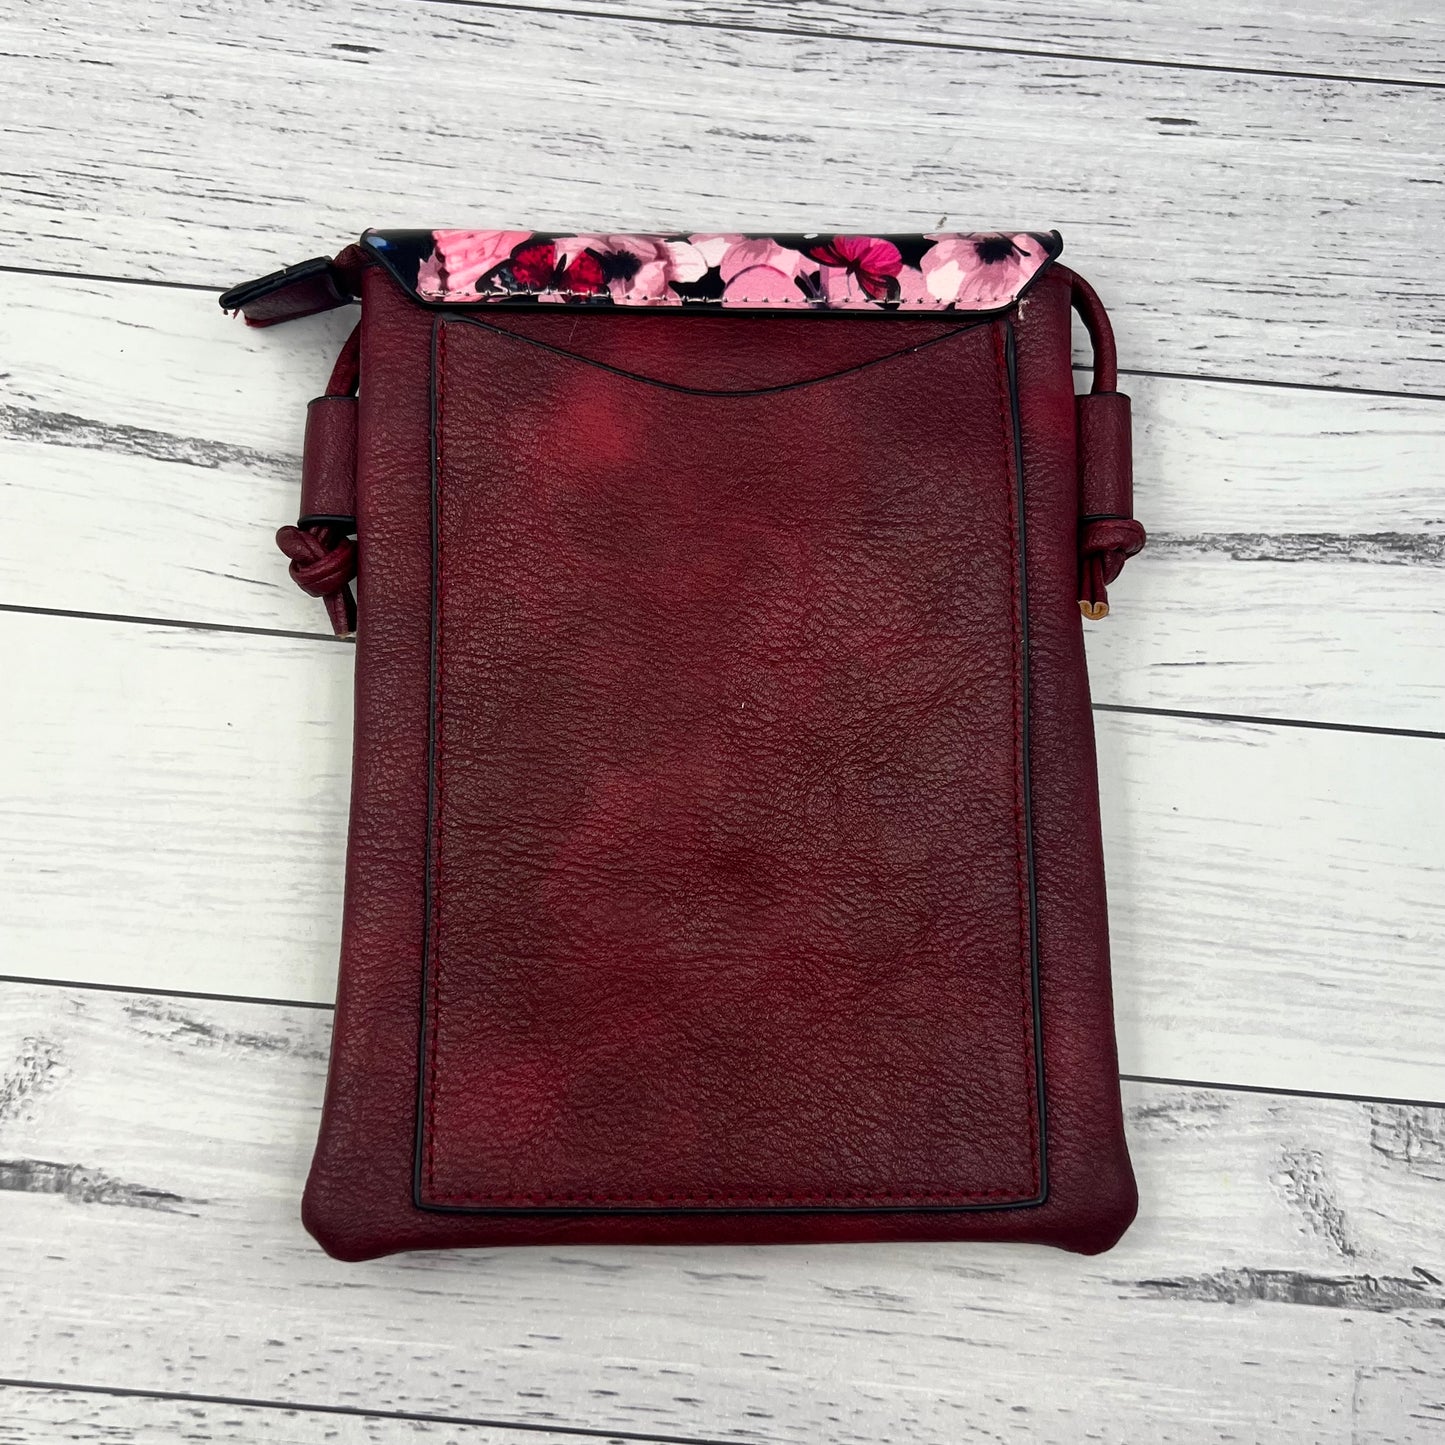 Maroon & Pink Butterfly Bag